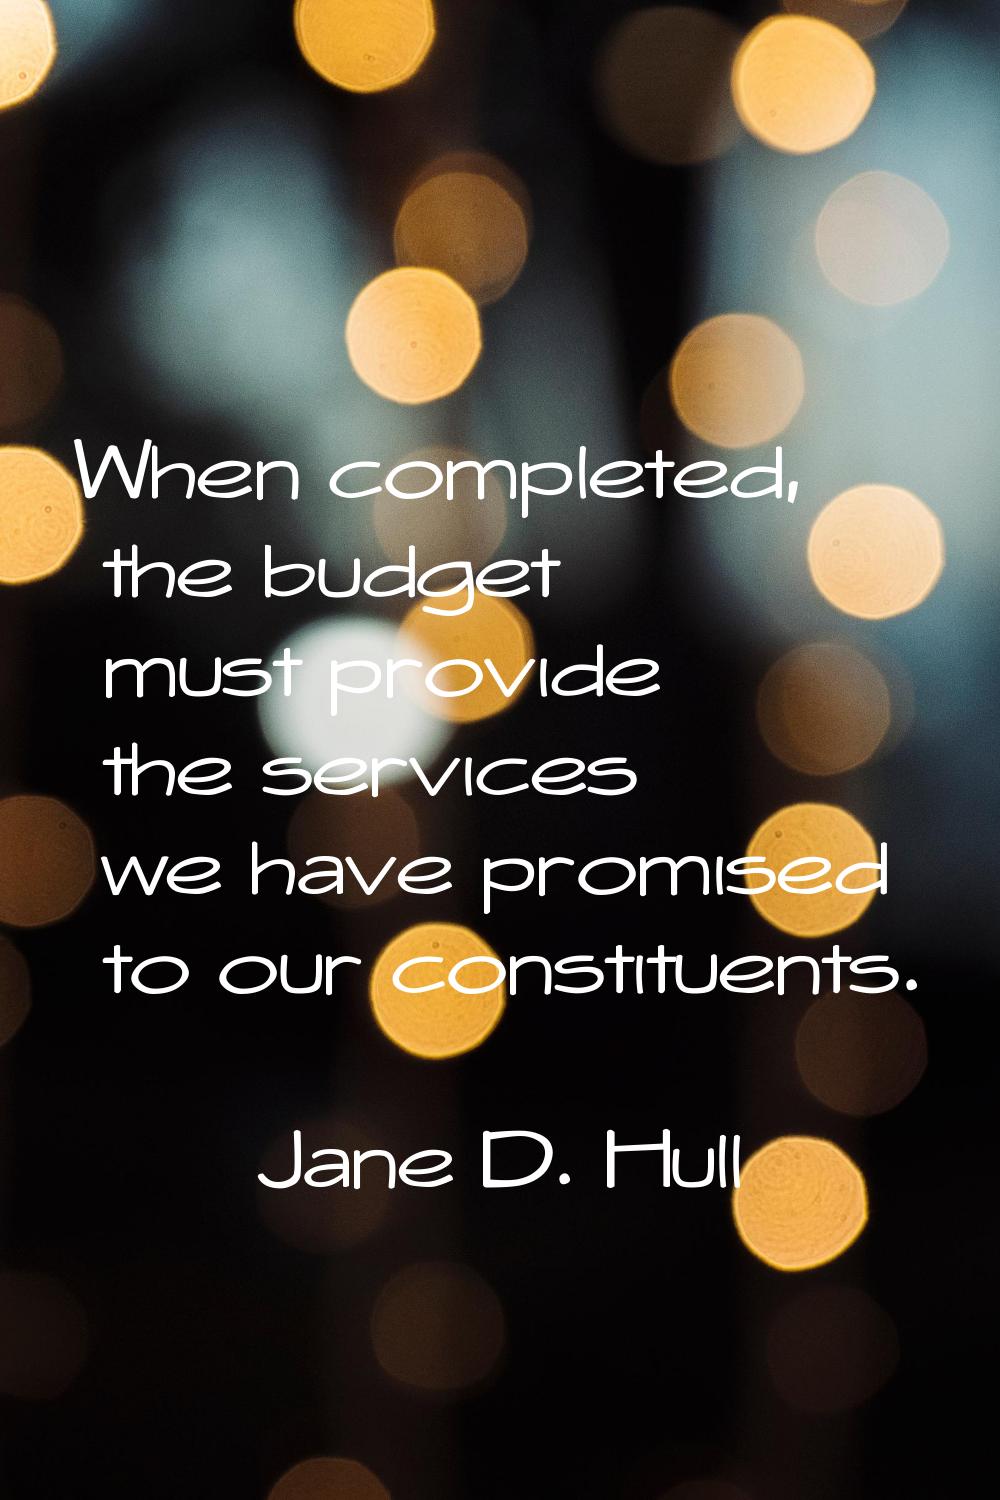 When completed, the budget must provide the services we have promised to our constituents.